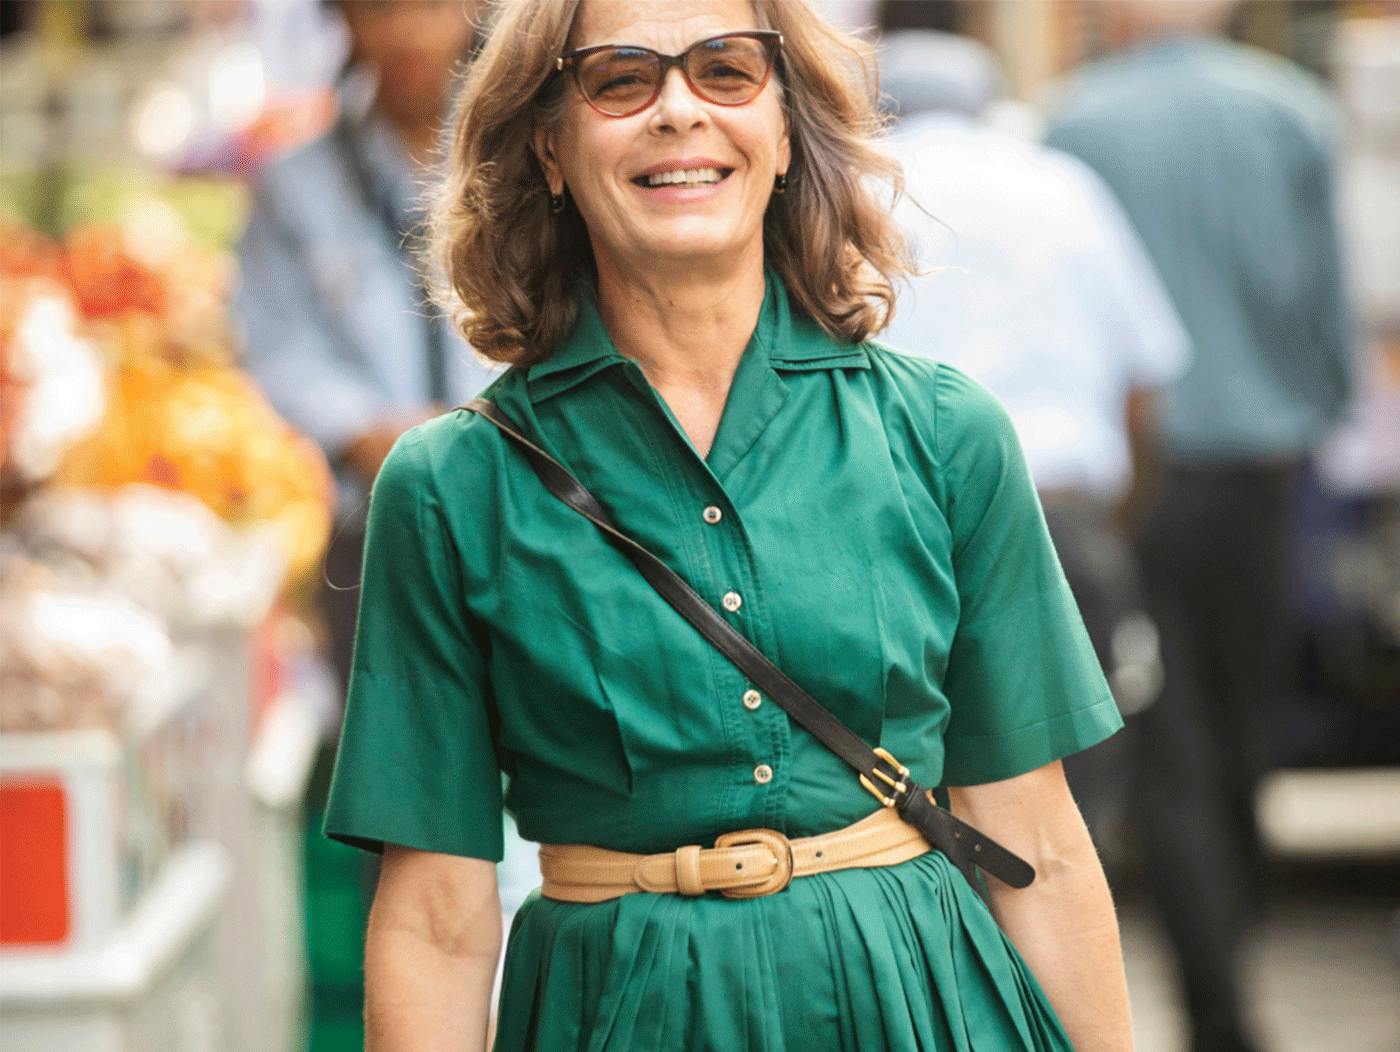 An elder caucasian woman with a jade green dress smiling while walking through a street market on a sunny day